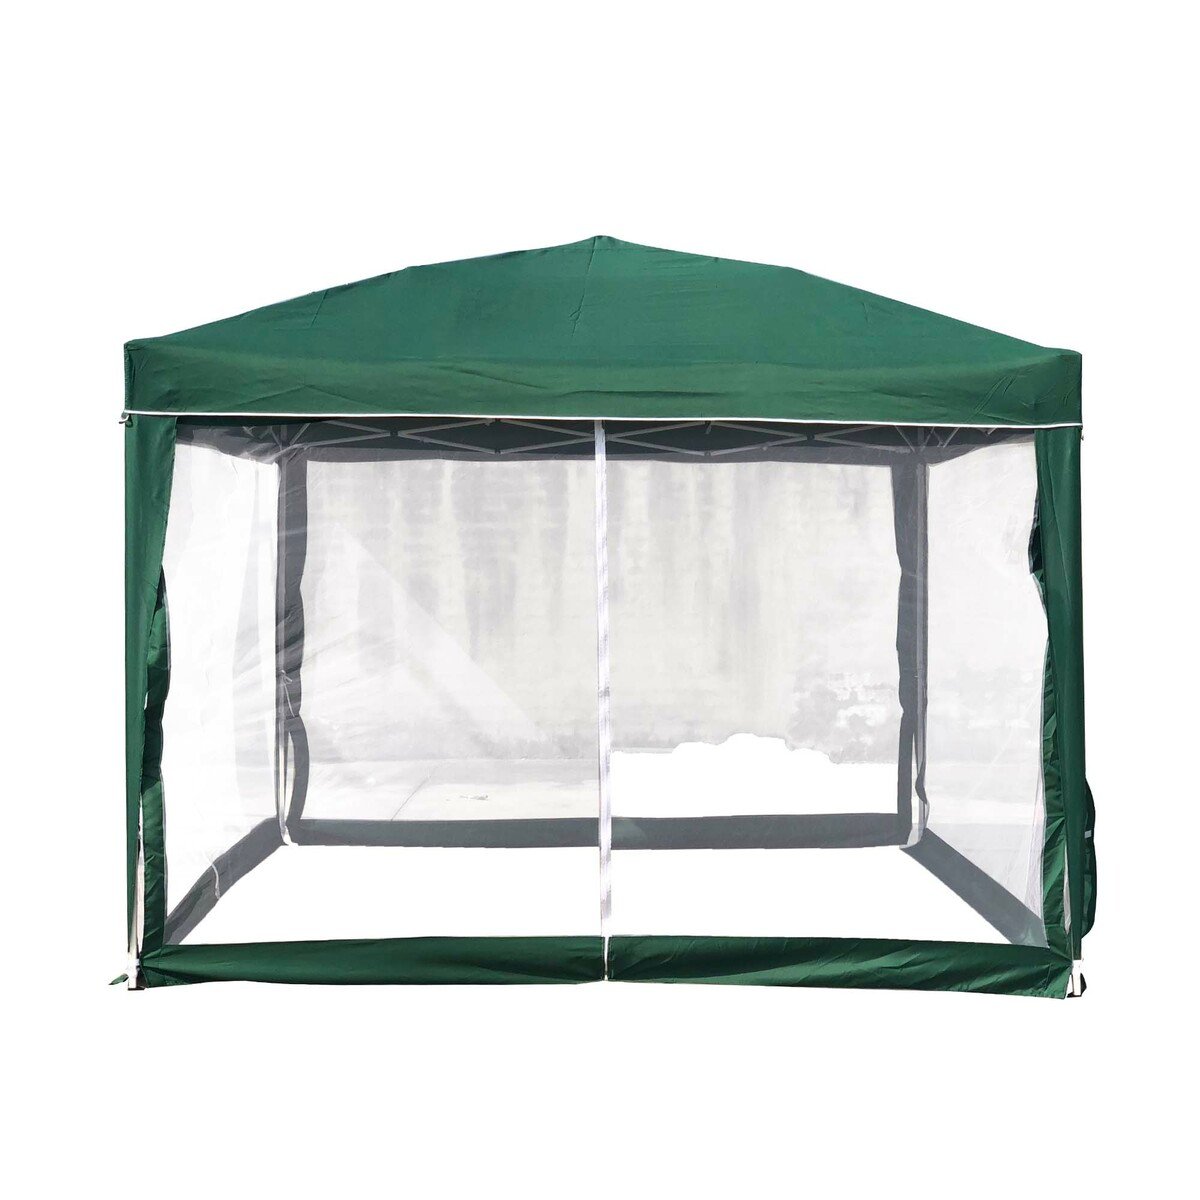 Relax Gazebo with Mosquito Net DP-005M 3x3Mtr Assorted Colors